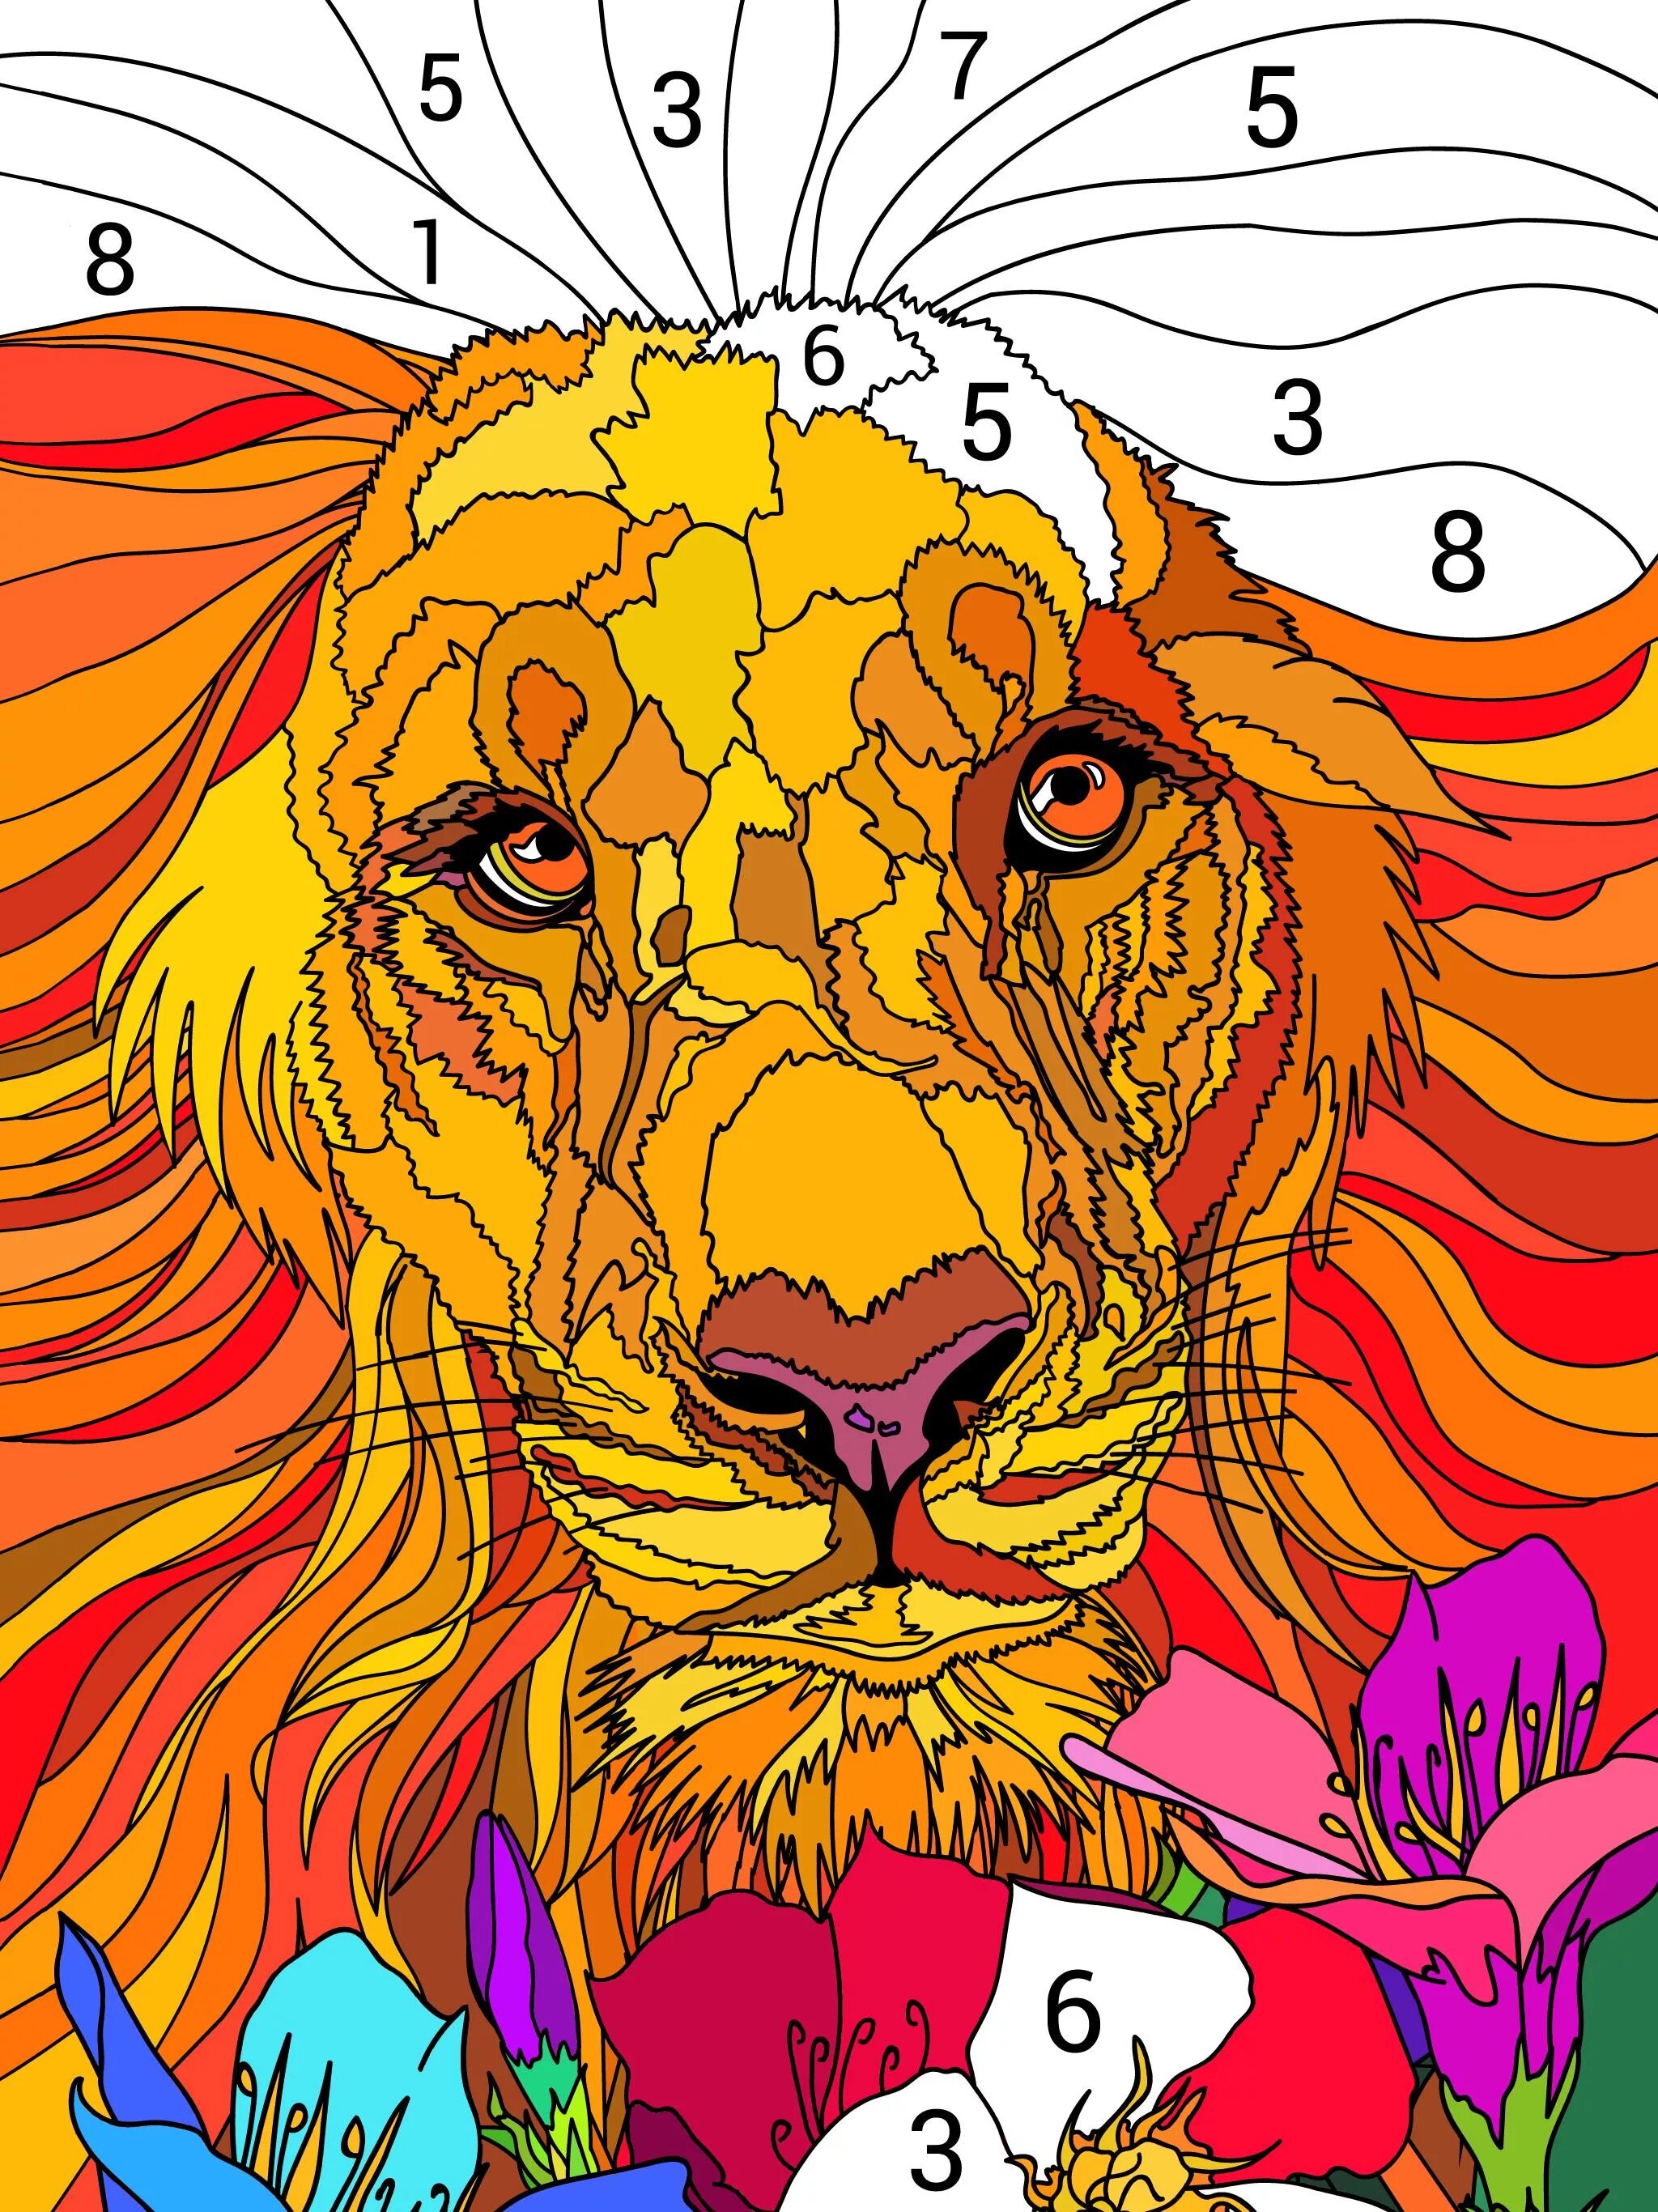 Intricate coloring pages with page numbers for adults